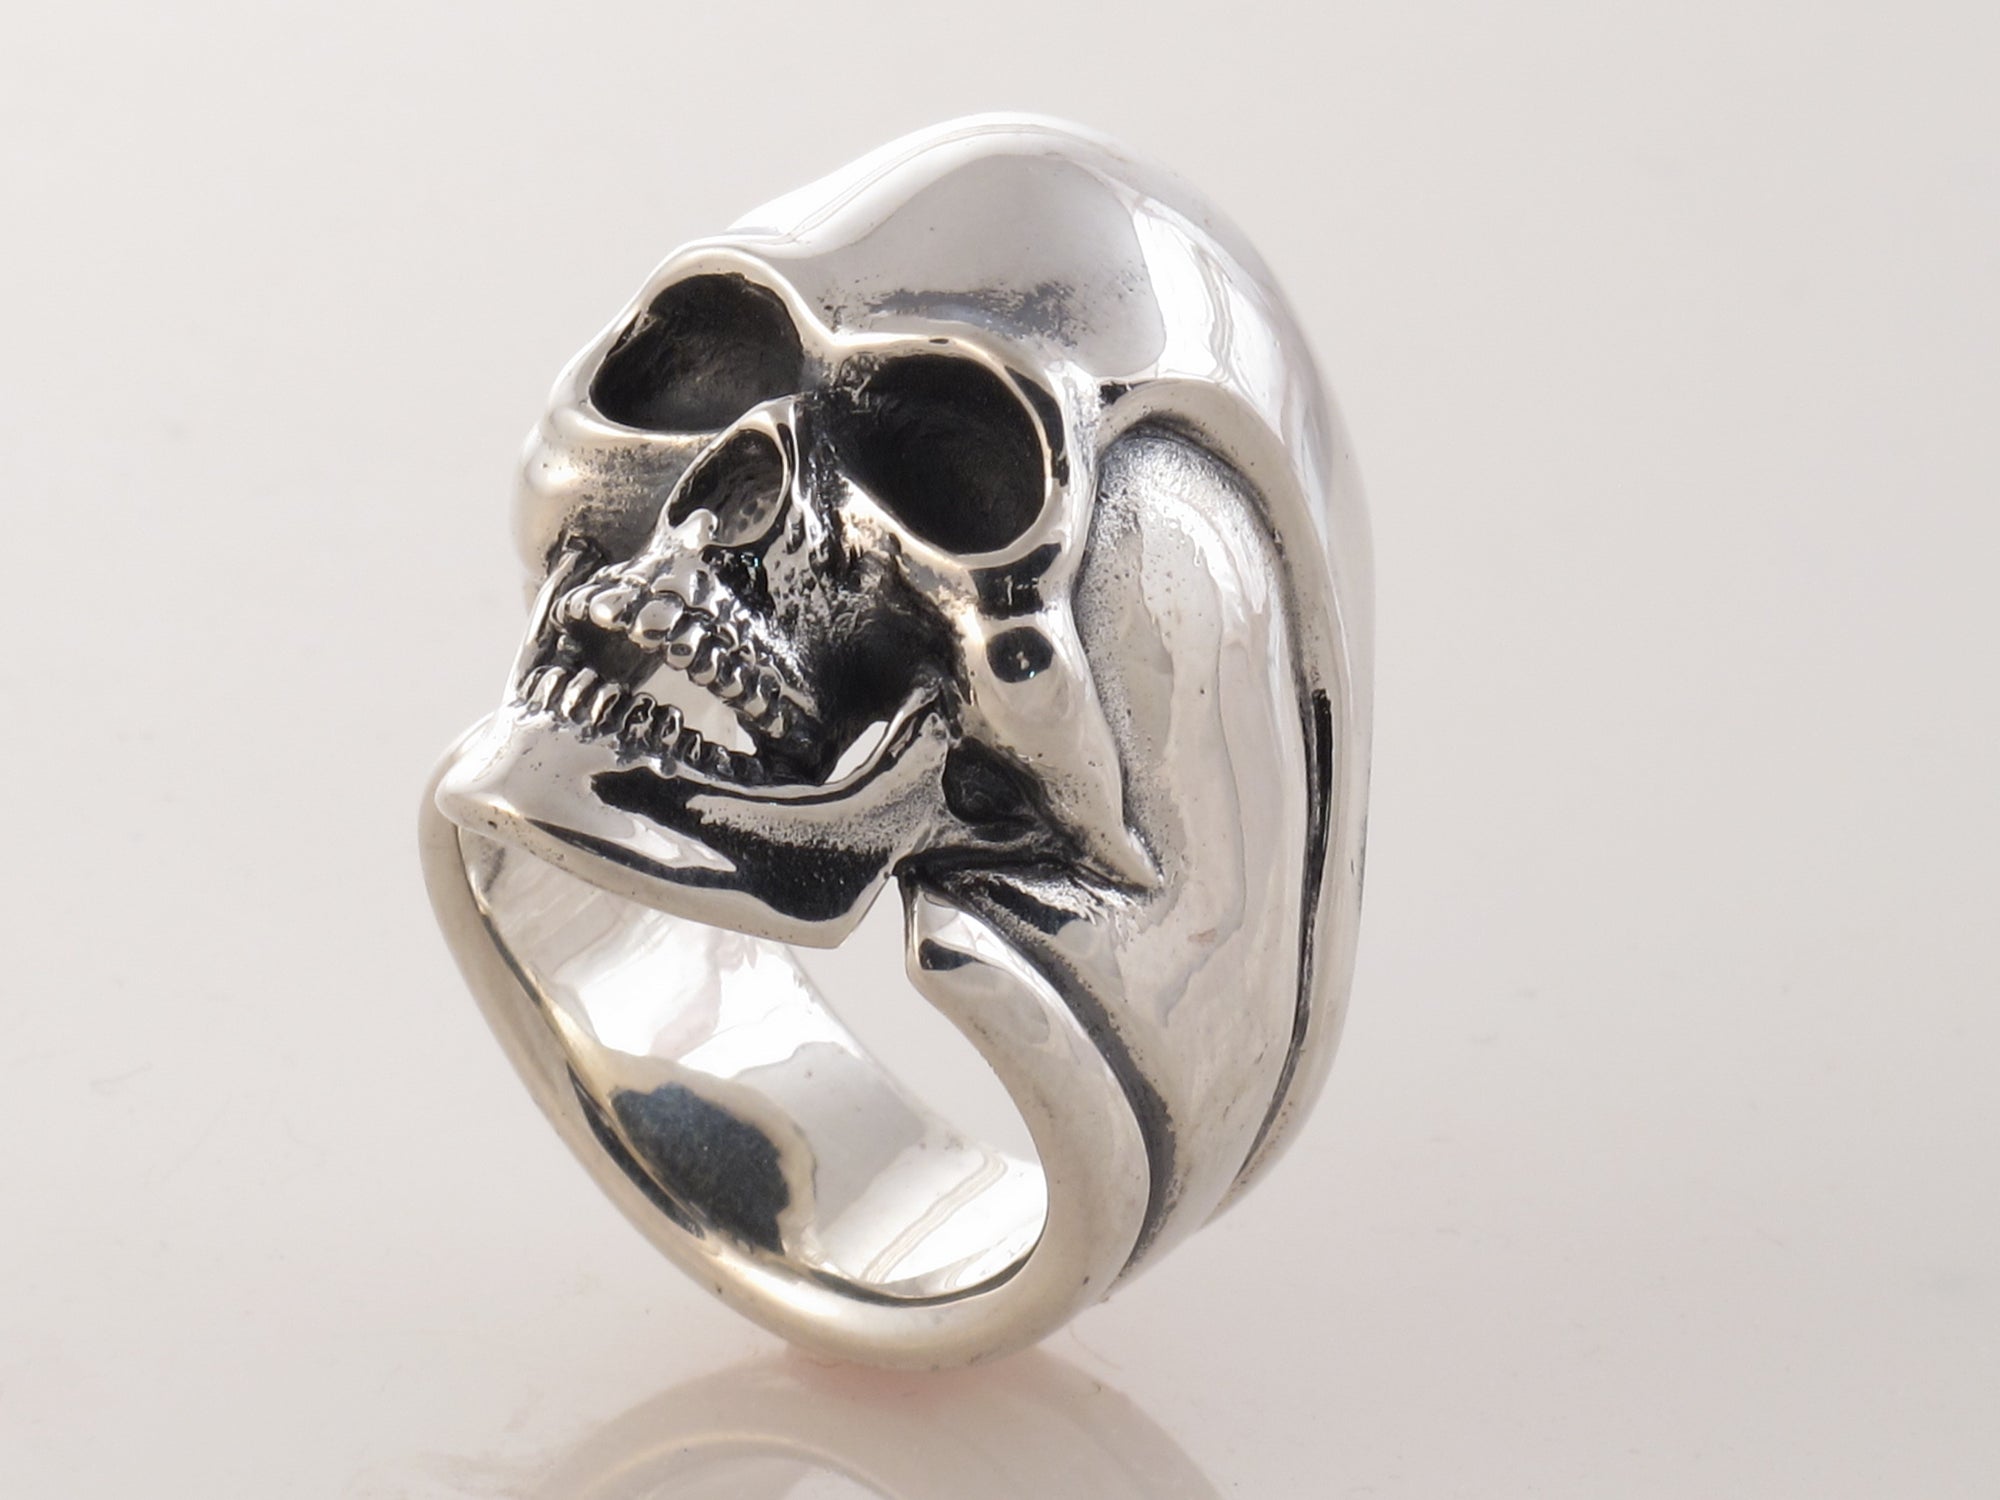 "#DR - 12 Sterling Skull Ring as seen from the side."